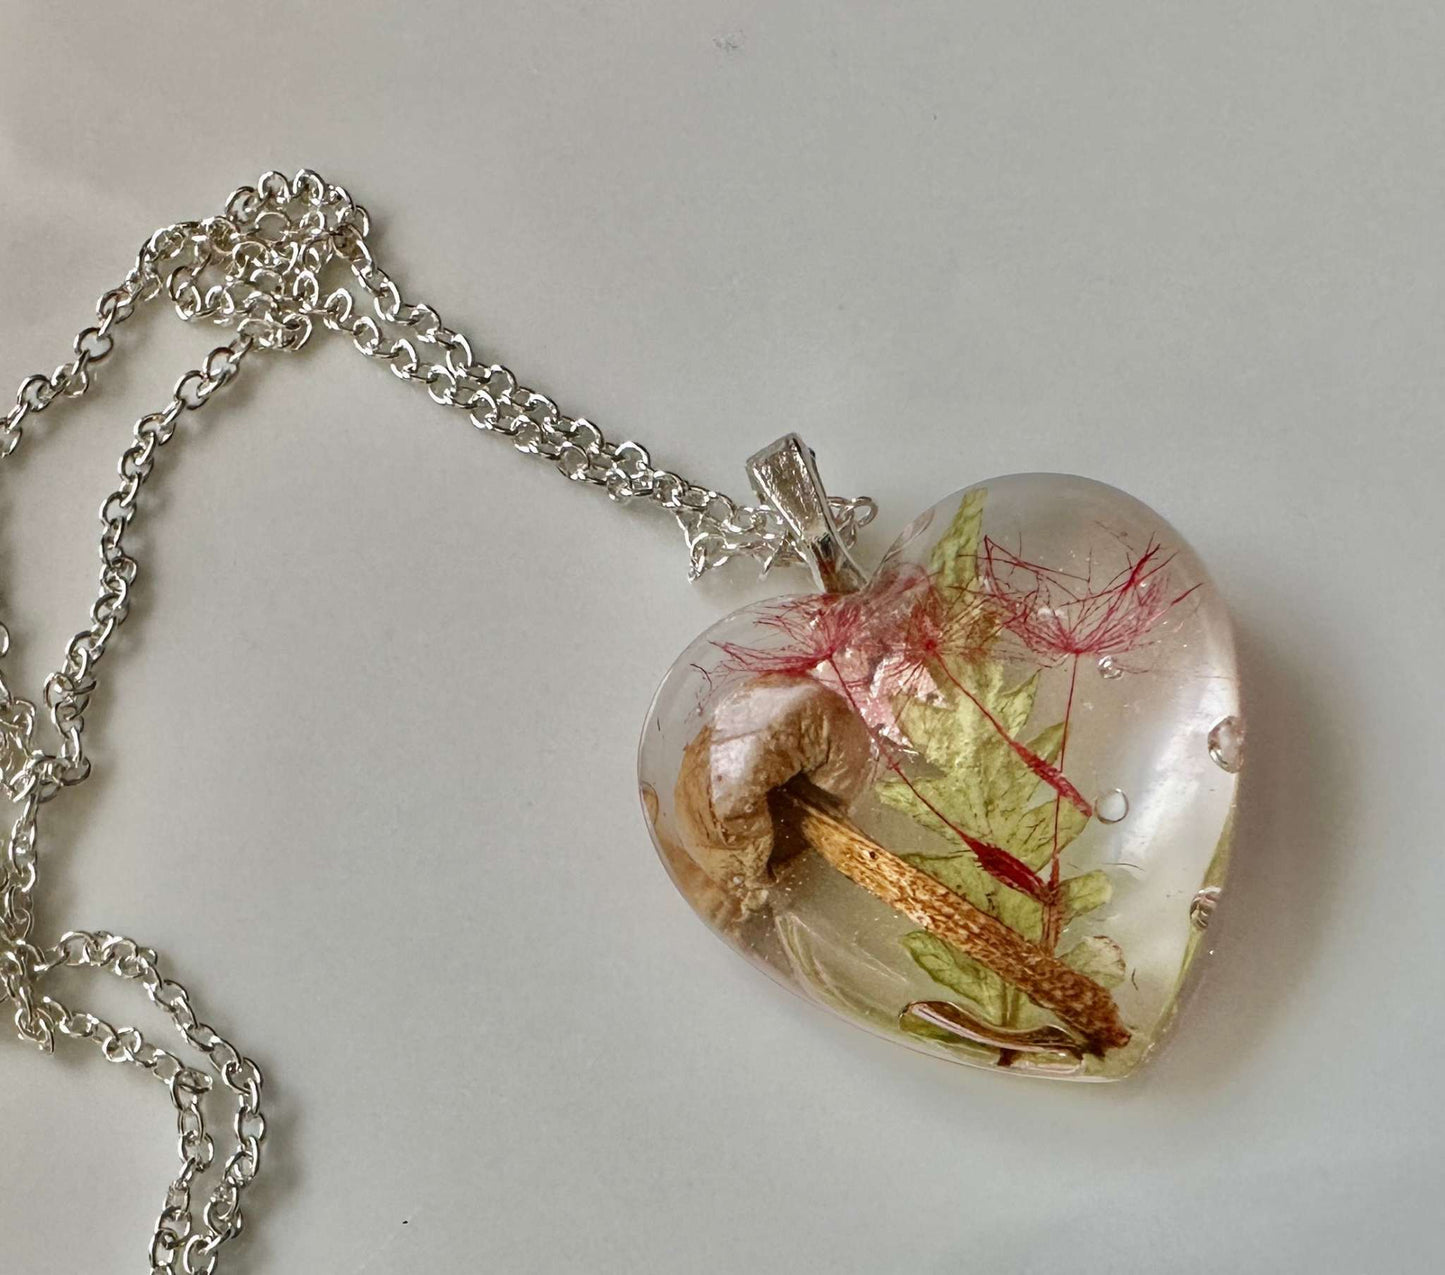 Whimsical Forest Heart Pendant Handmade with Dried Botanicals in Resin